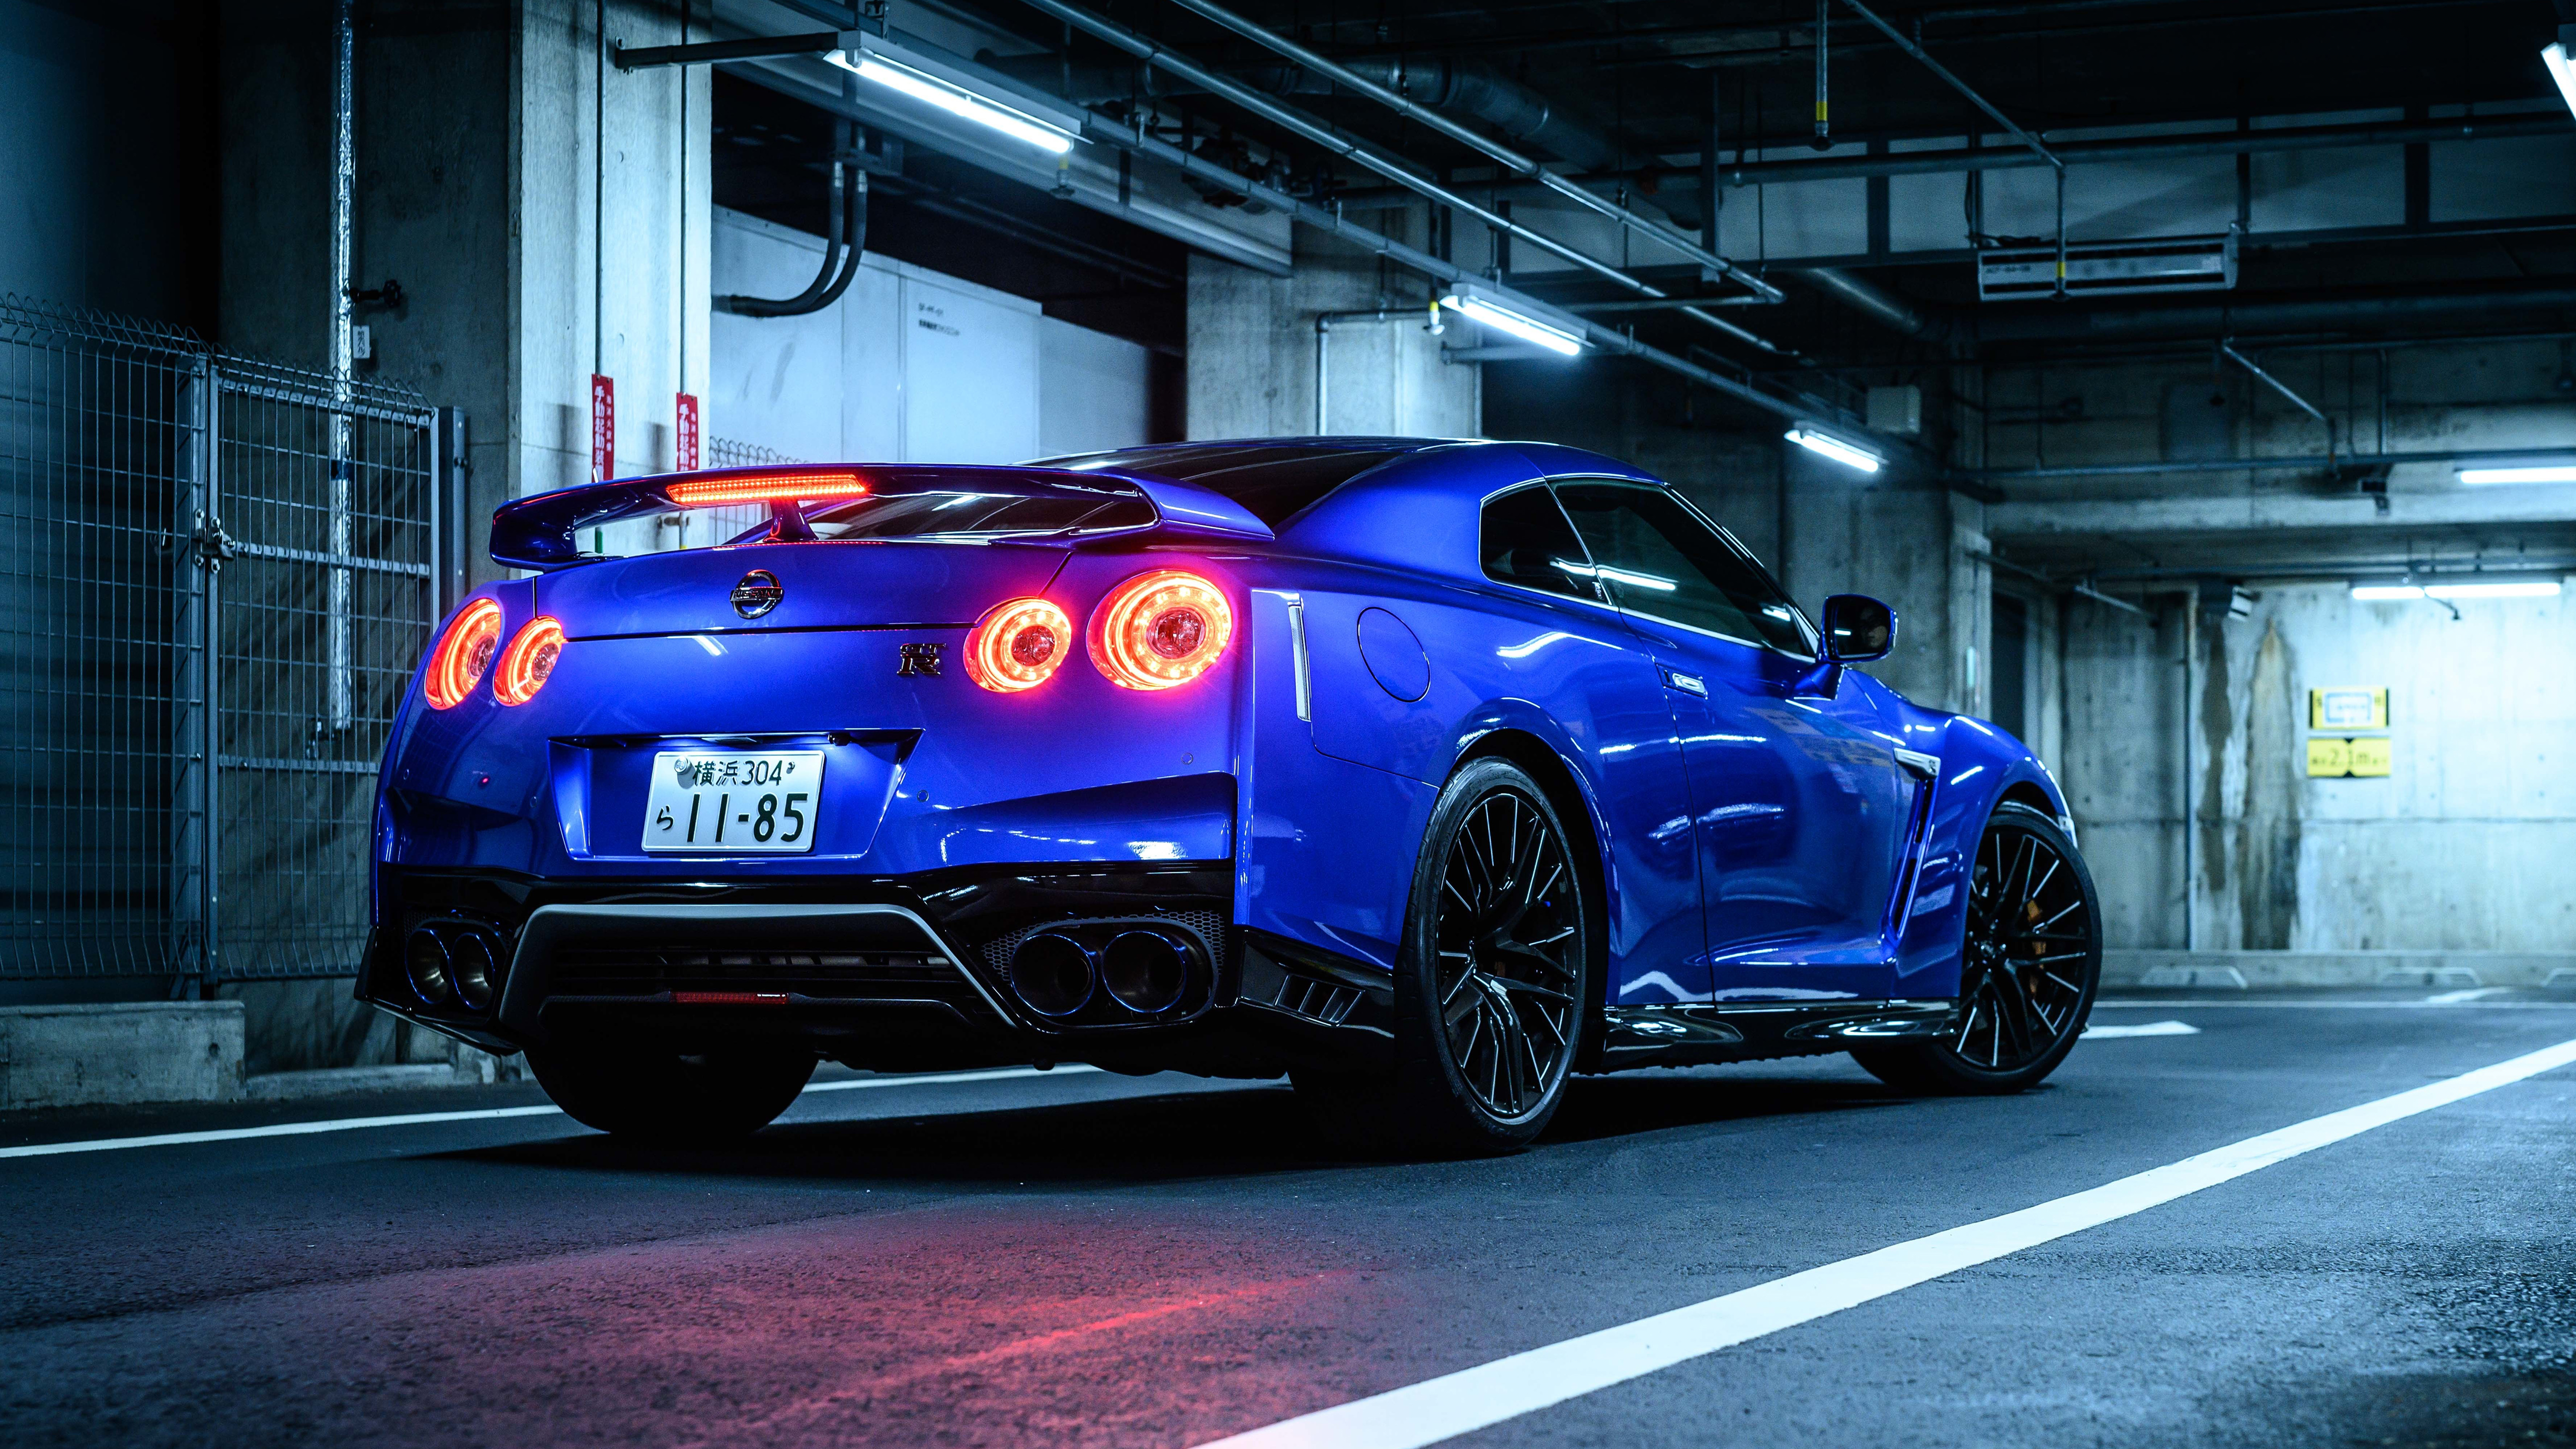 Nissan GT R50 Nissan GT R Car Vehicle Blue Cars Parking Lot Supercars Taillights 5120x2880